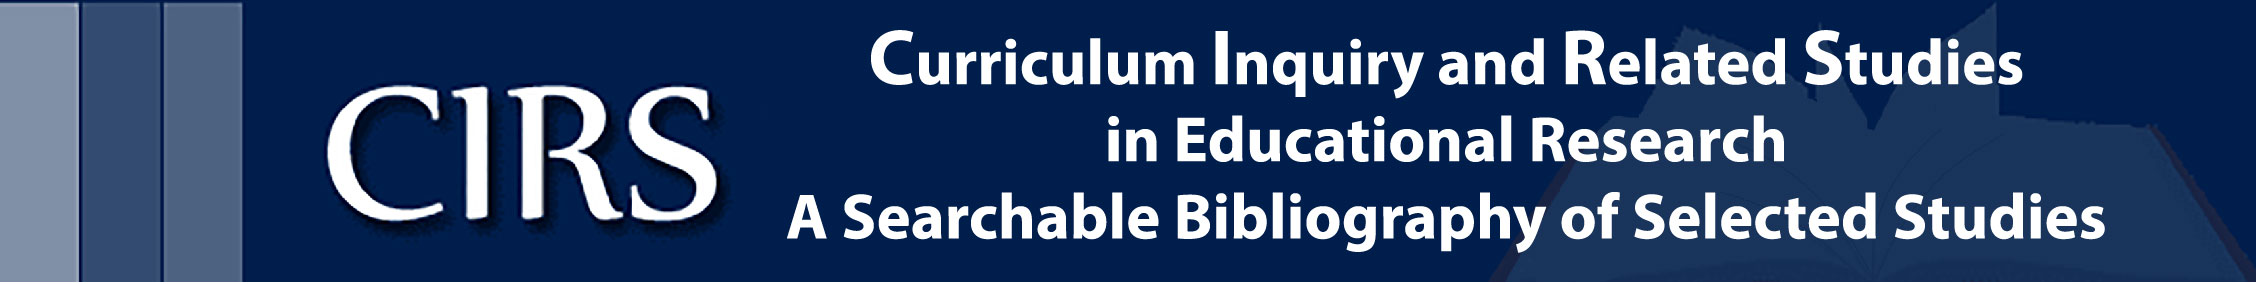 CIRS: Curriculum Inquiry and Related Studies from Educational Research: A Searchable Bibliography of Selected Studies